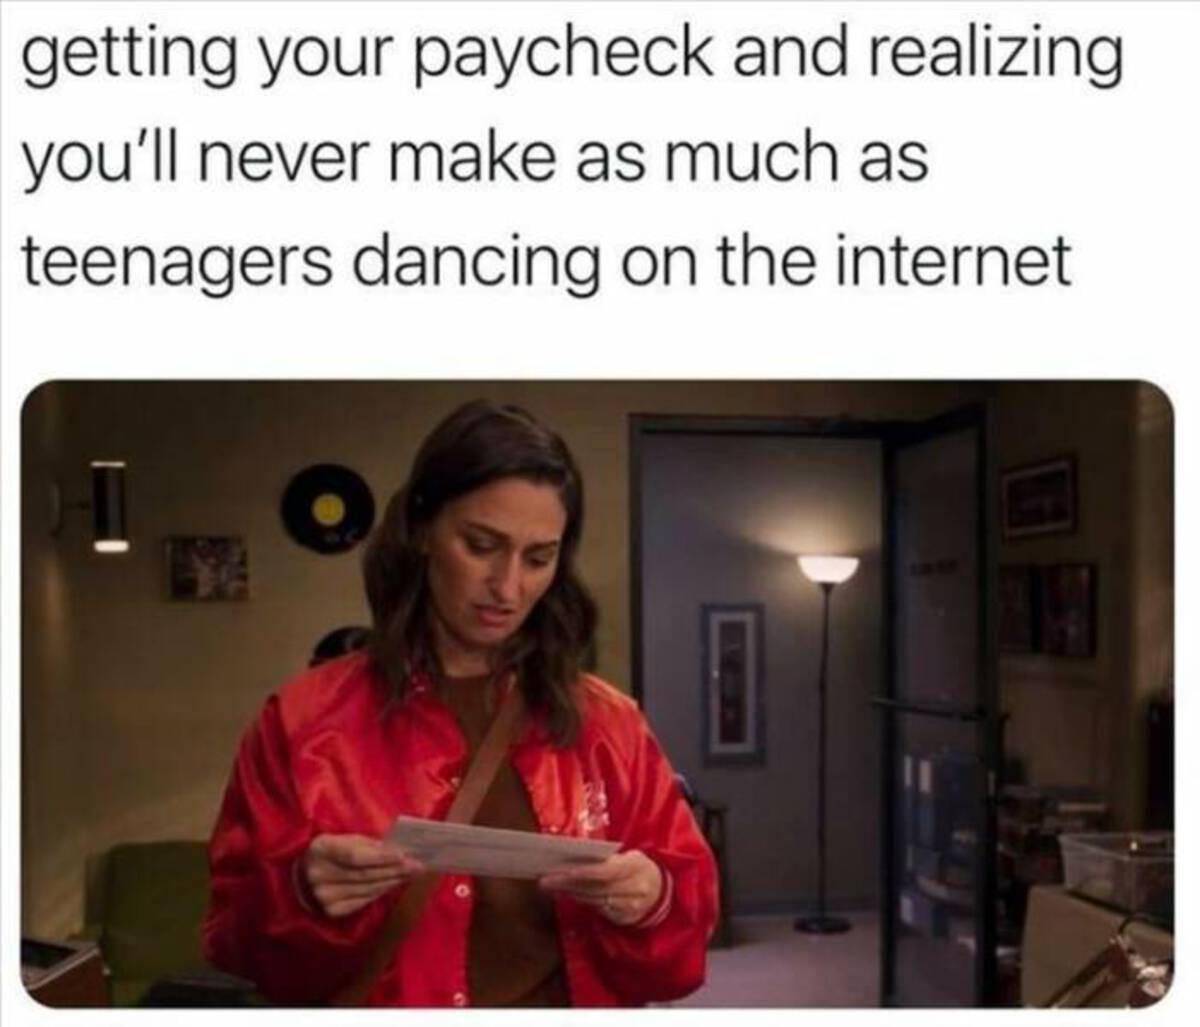 girl - getting your paycheck and realizing you'll never make as much as teenagers dancing on the internet